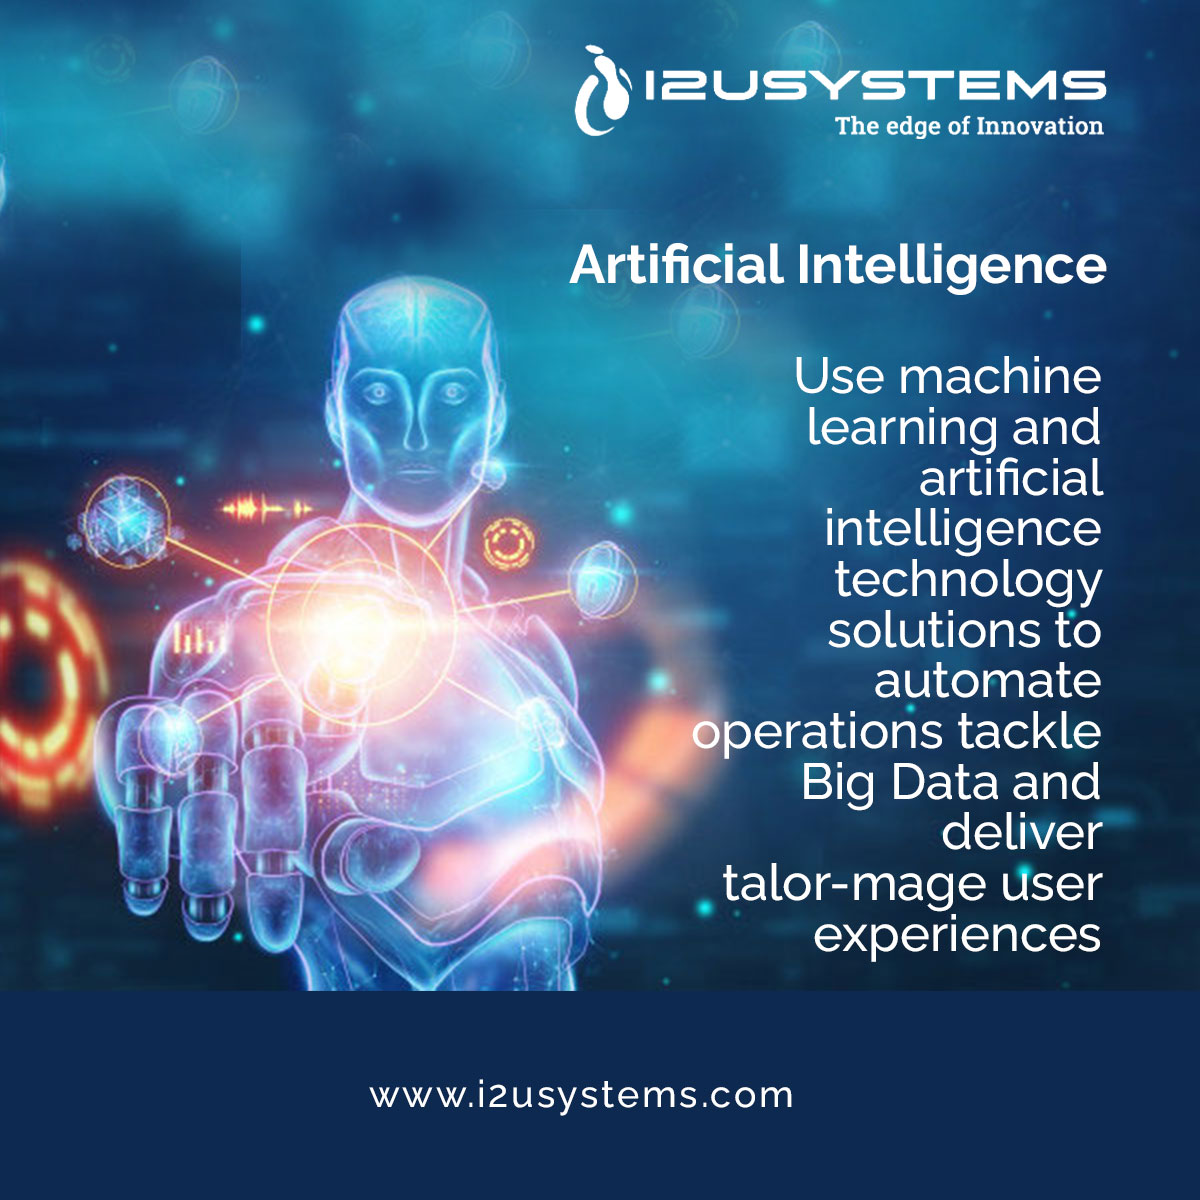 Artificial Intelligence Use machine learning and artificial intelligence technology solutions to automate operations tackle Big Data and deliver tailor-mage user experiences #i2usystems #c2crequirement #recruiter #benchsales #artificial #intelligence #technology #bigdata #tailor